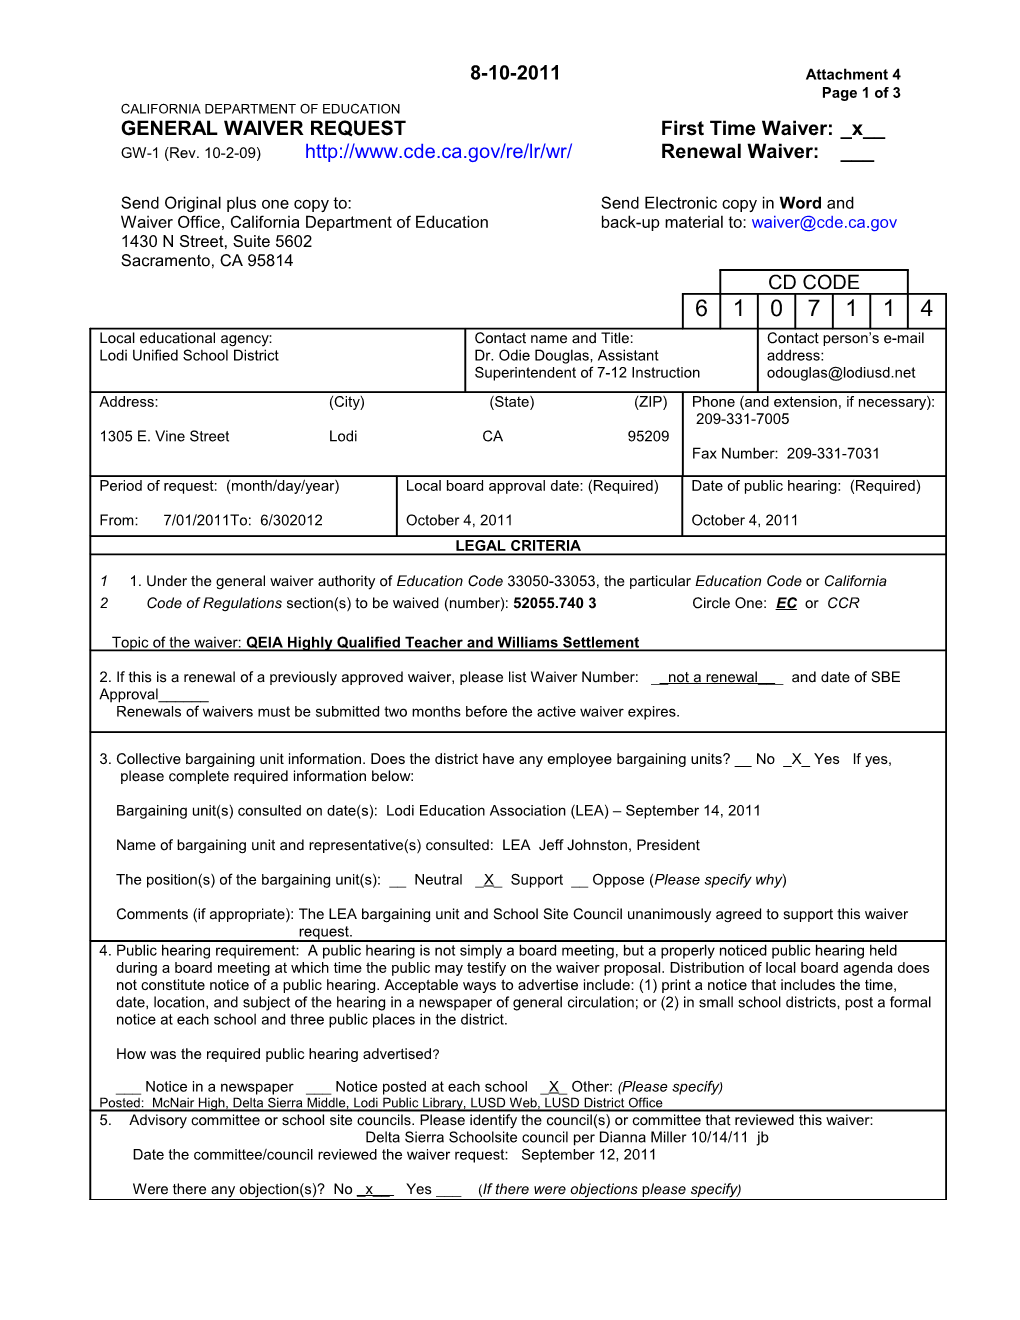 January 2012 Waiver Item W18 Attachment 4 Meeting Agendas (CA State Board of Education)